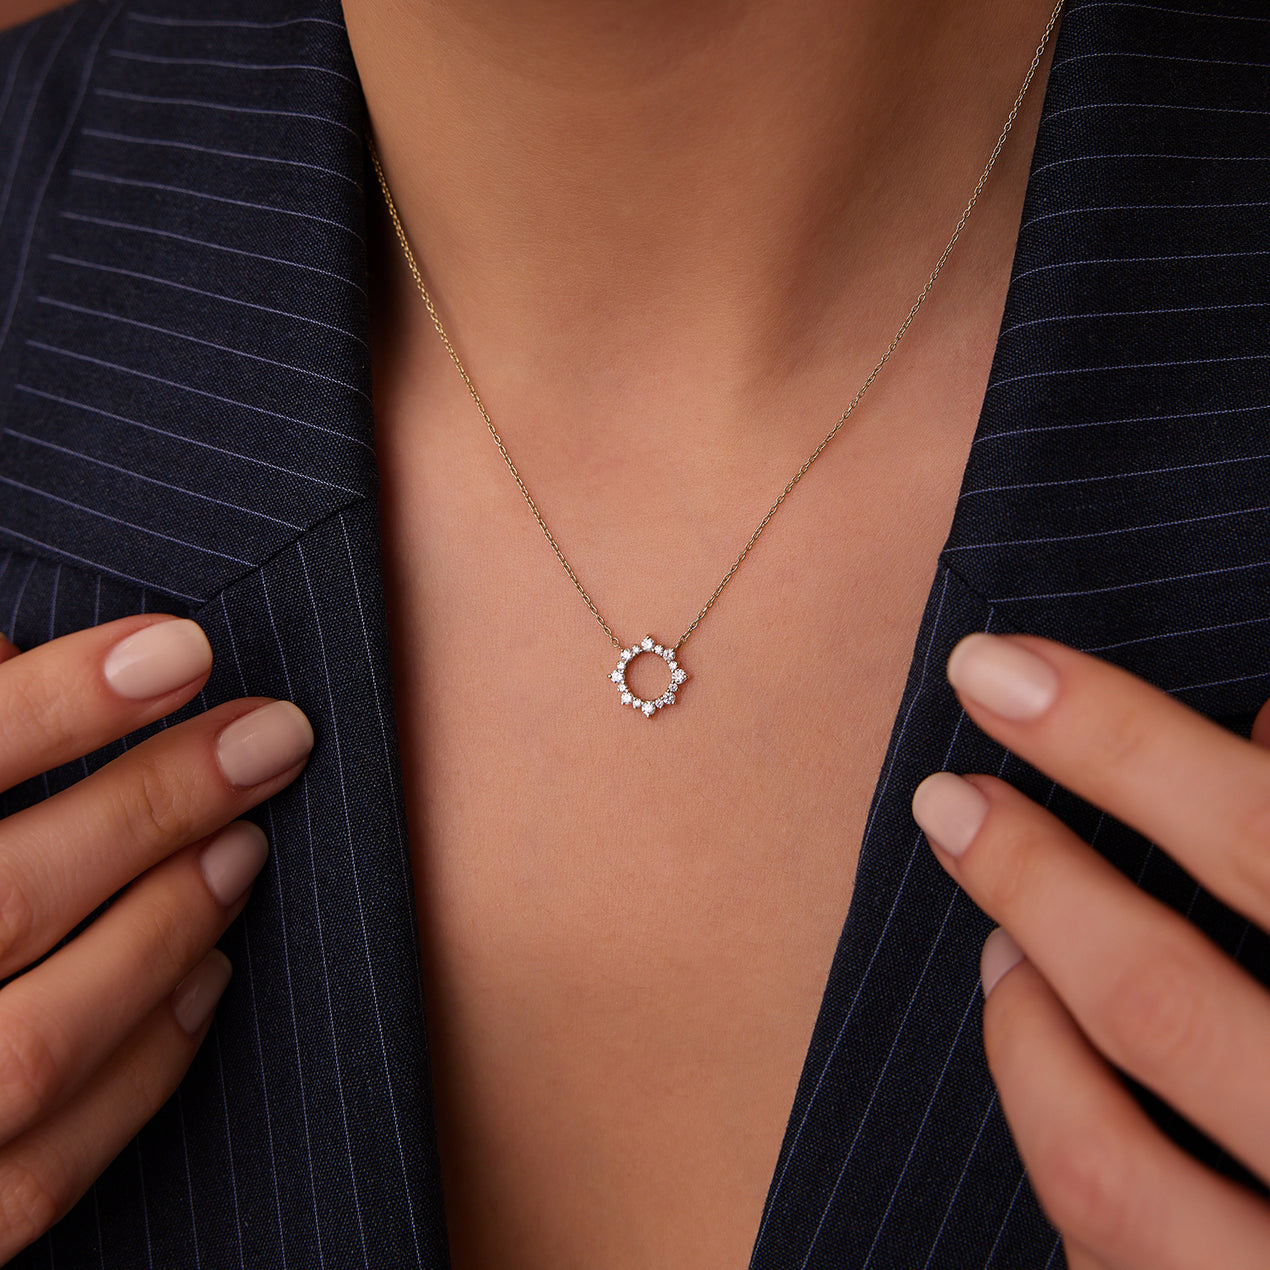 Diamond Circle Necklaces: A Symbol of Eternity and Infinity